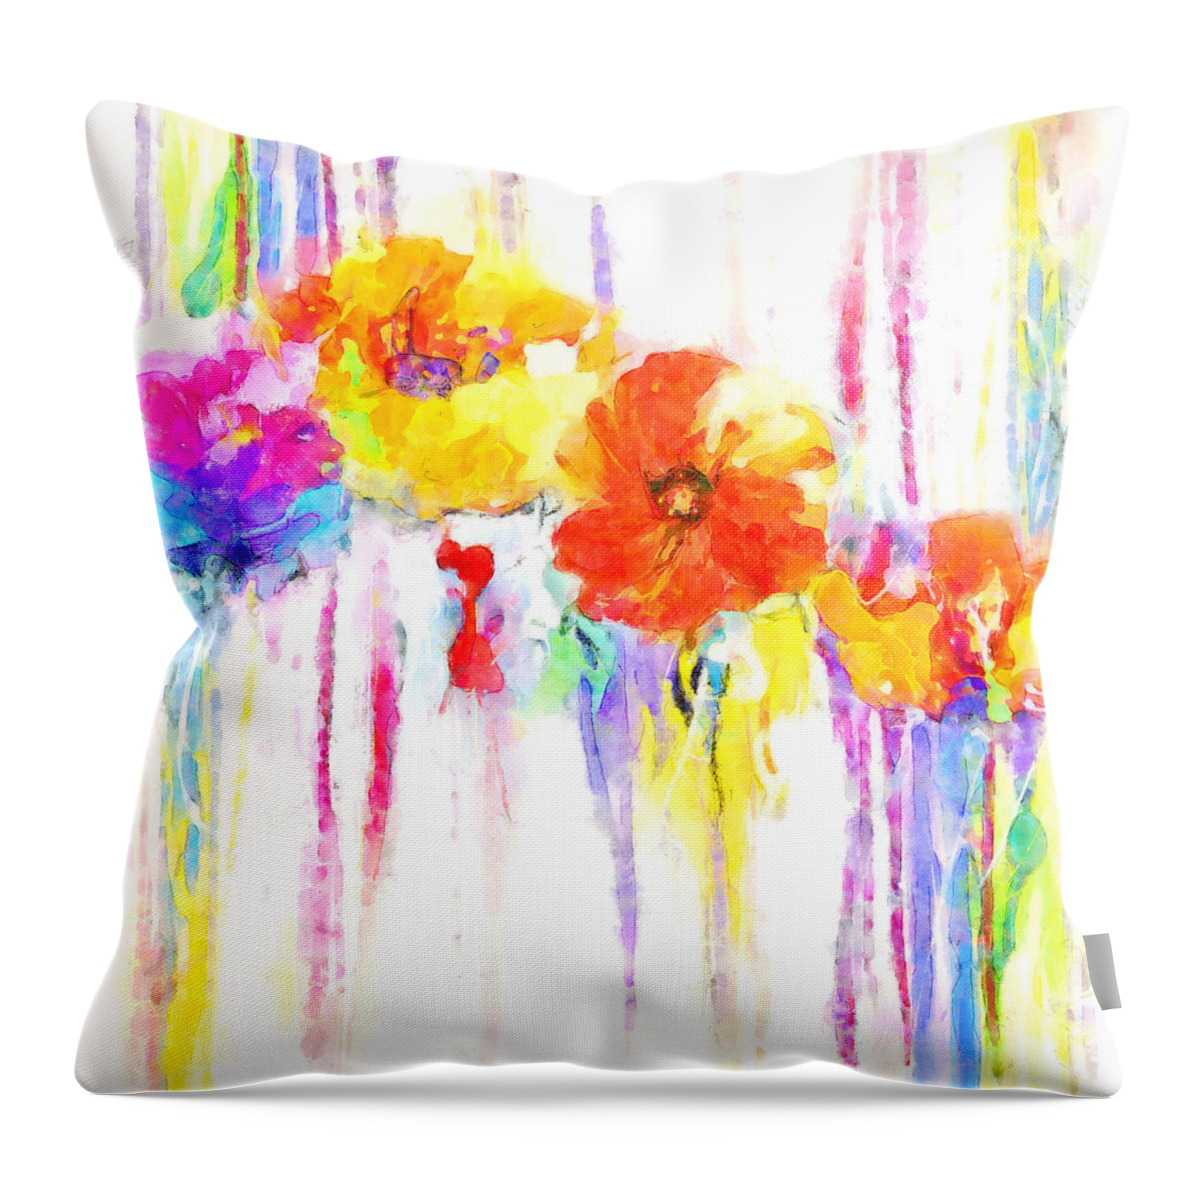 Digital Arts Throw Pillow featuring the photograph Four Flowers by Munir Alawi